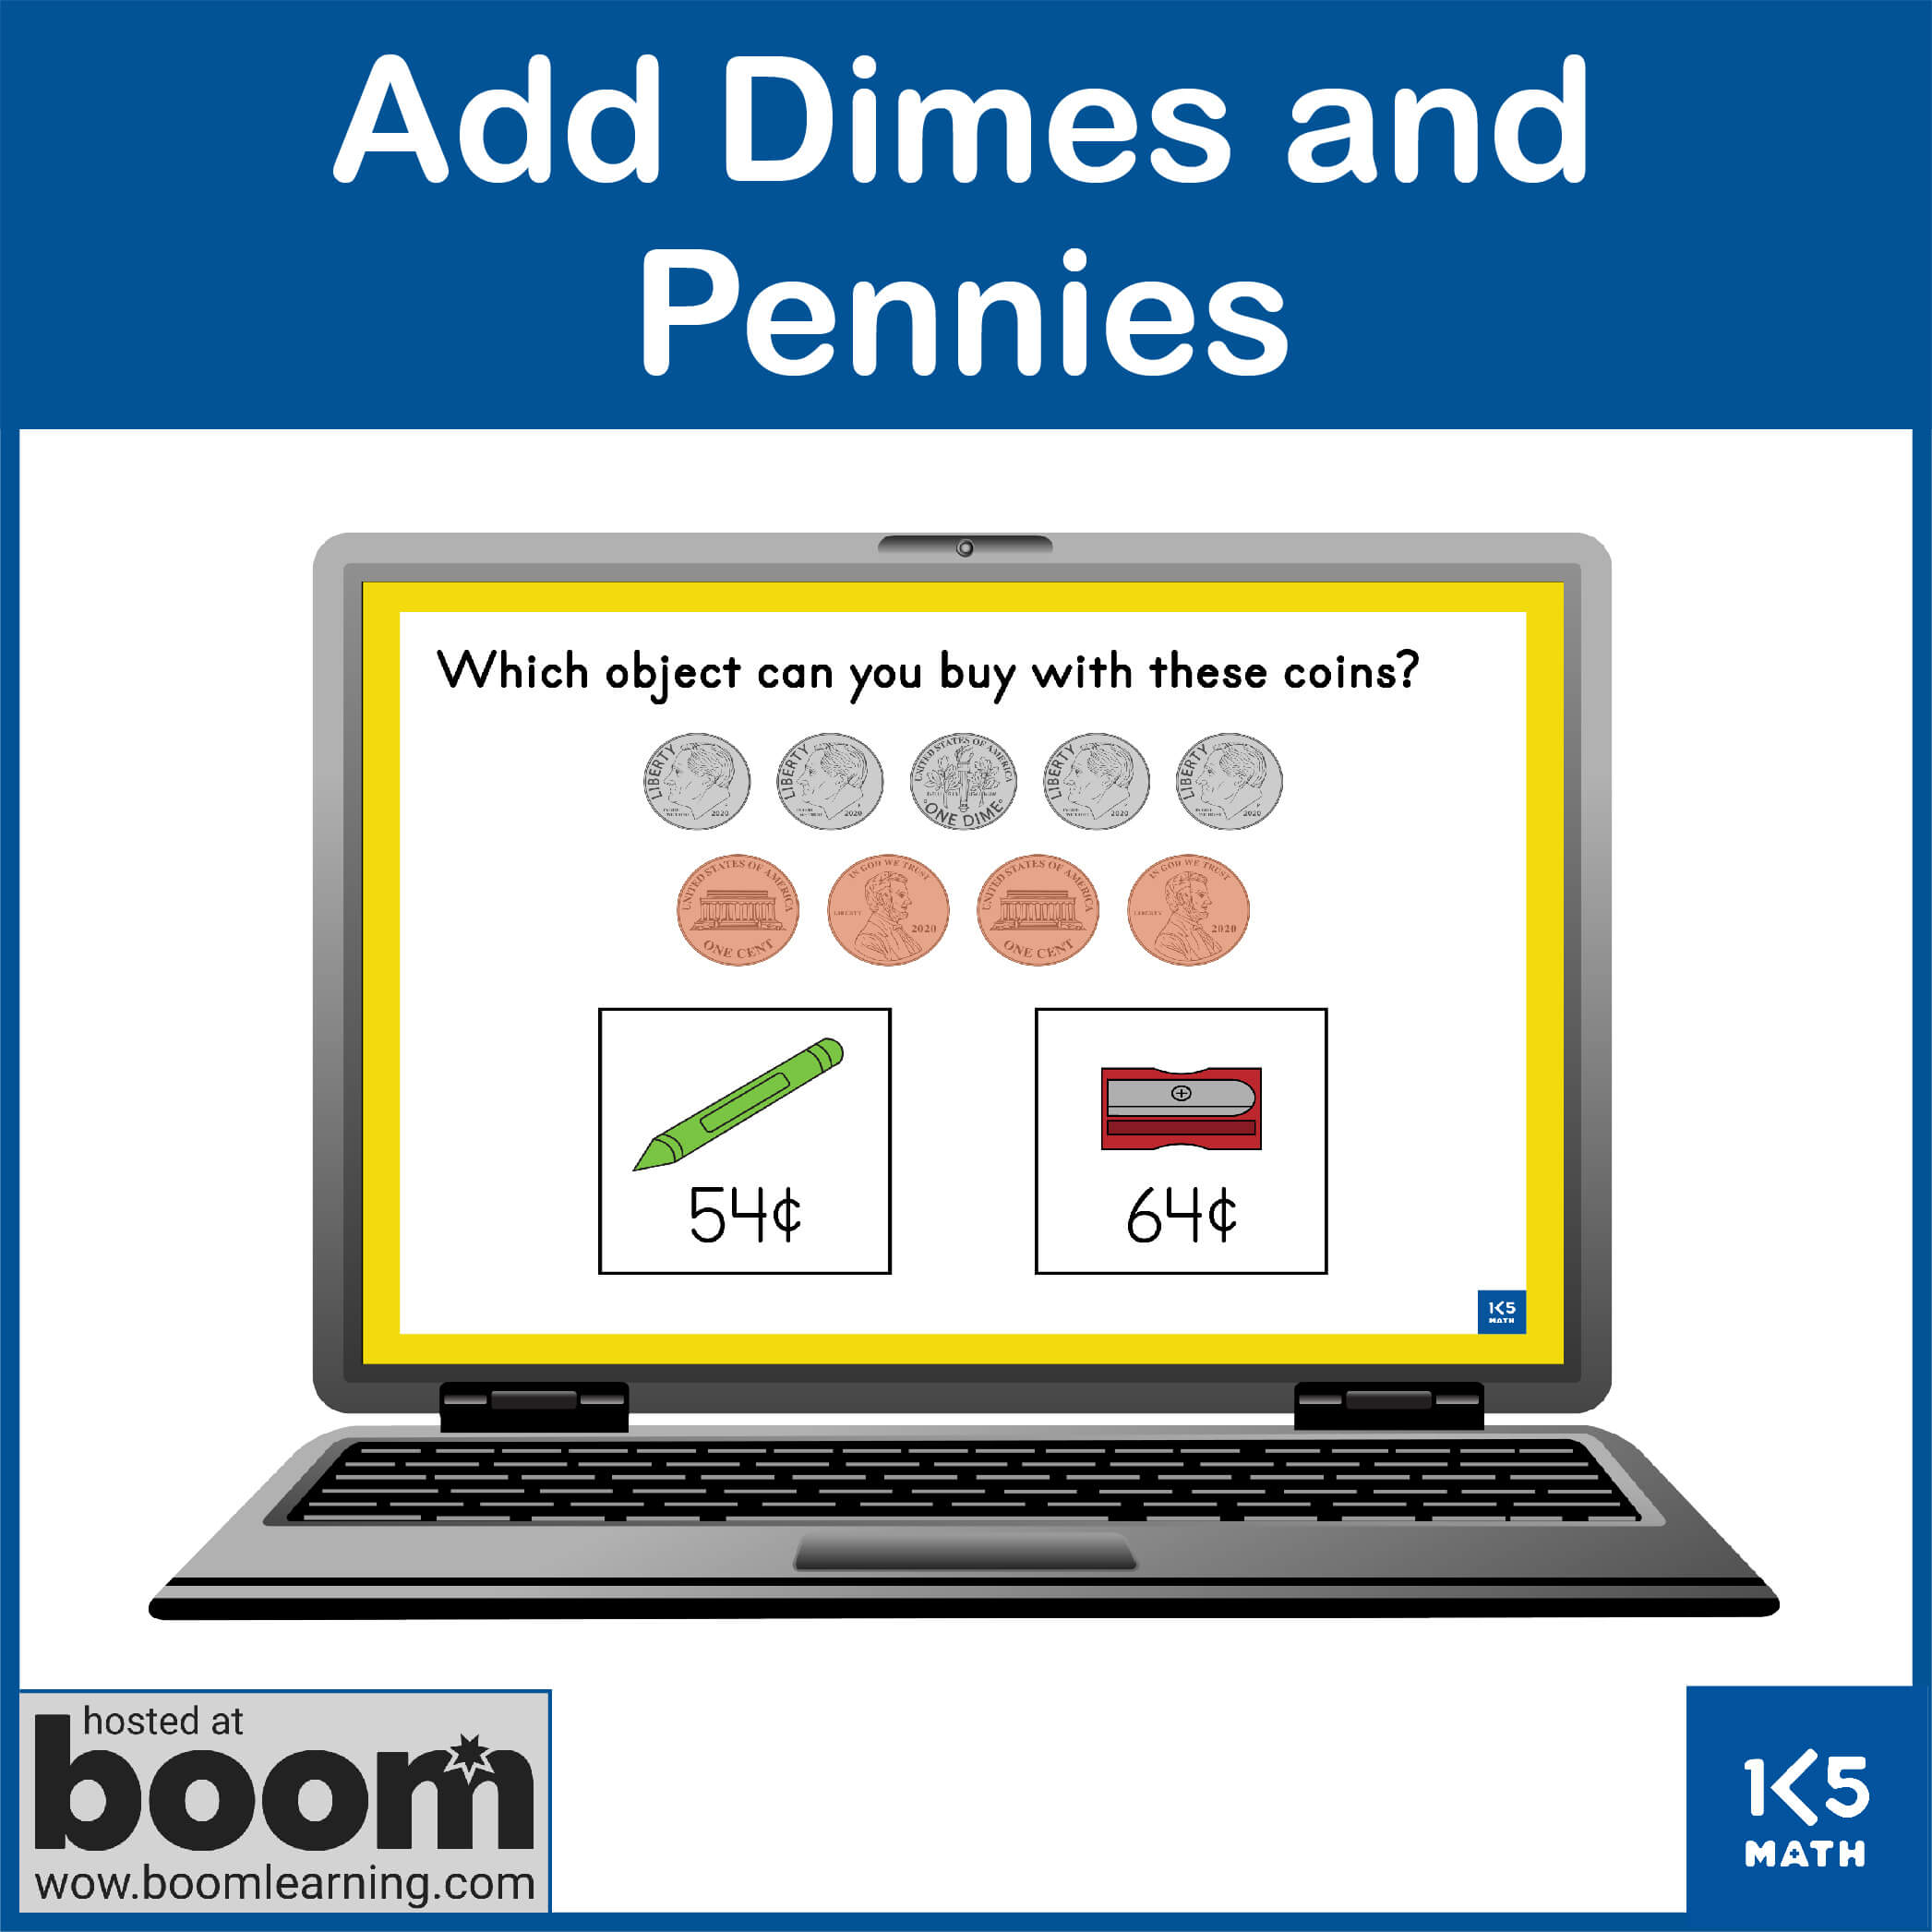 Boom Cards: Adding Dimes and Pennies